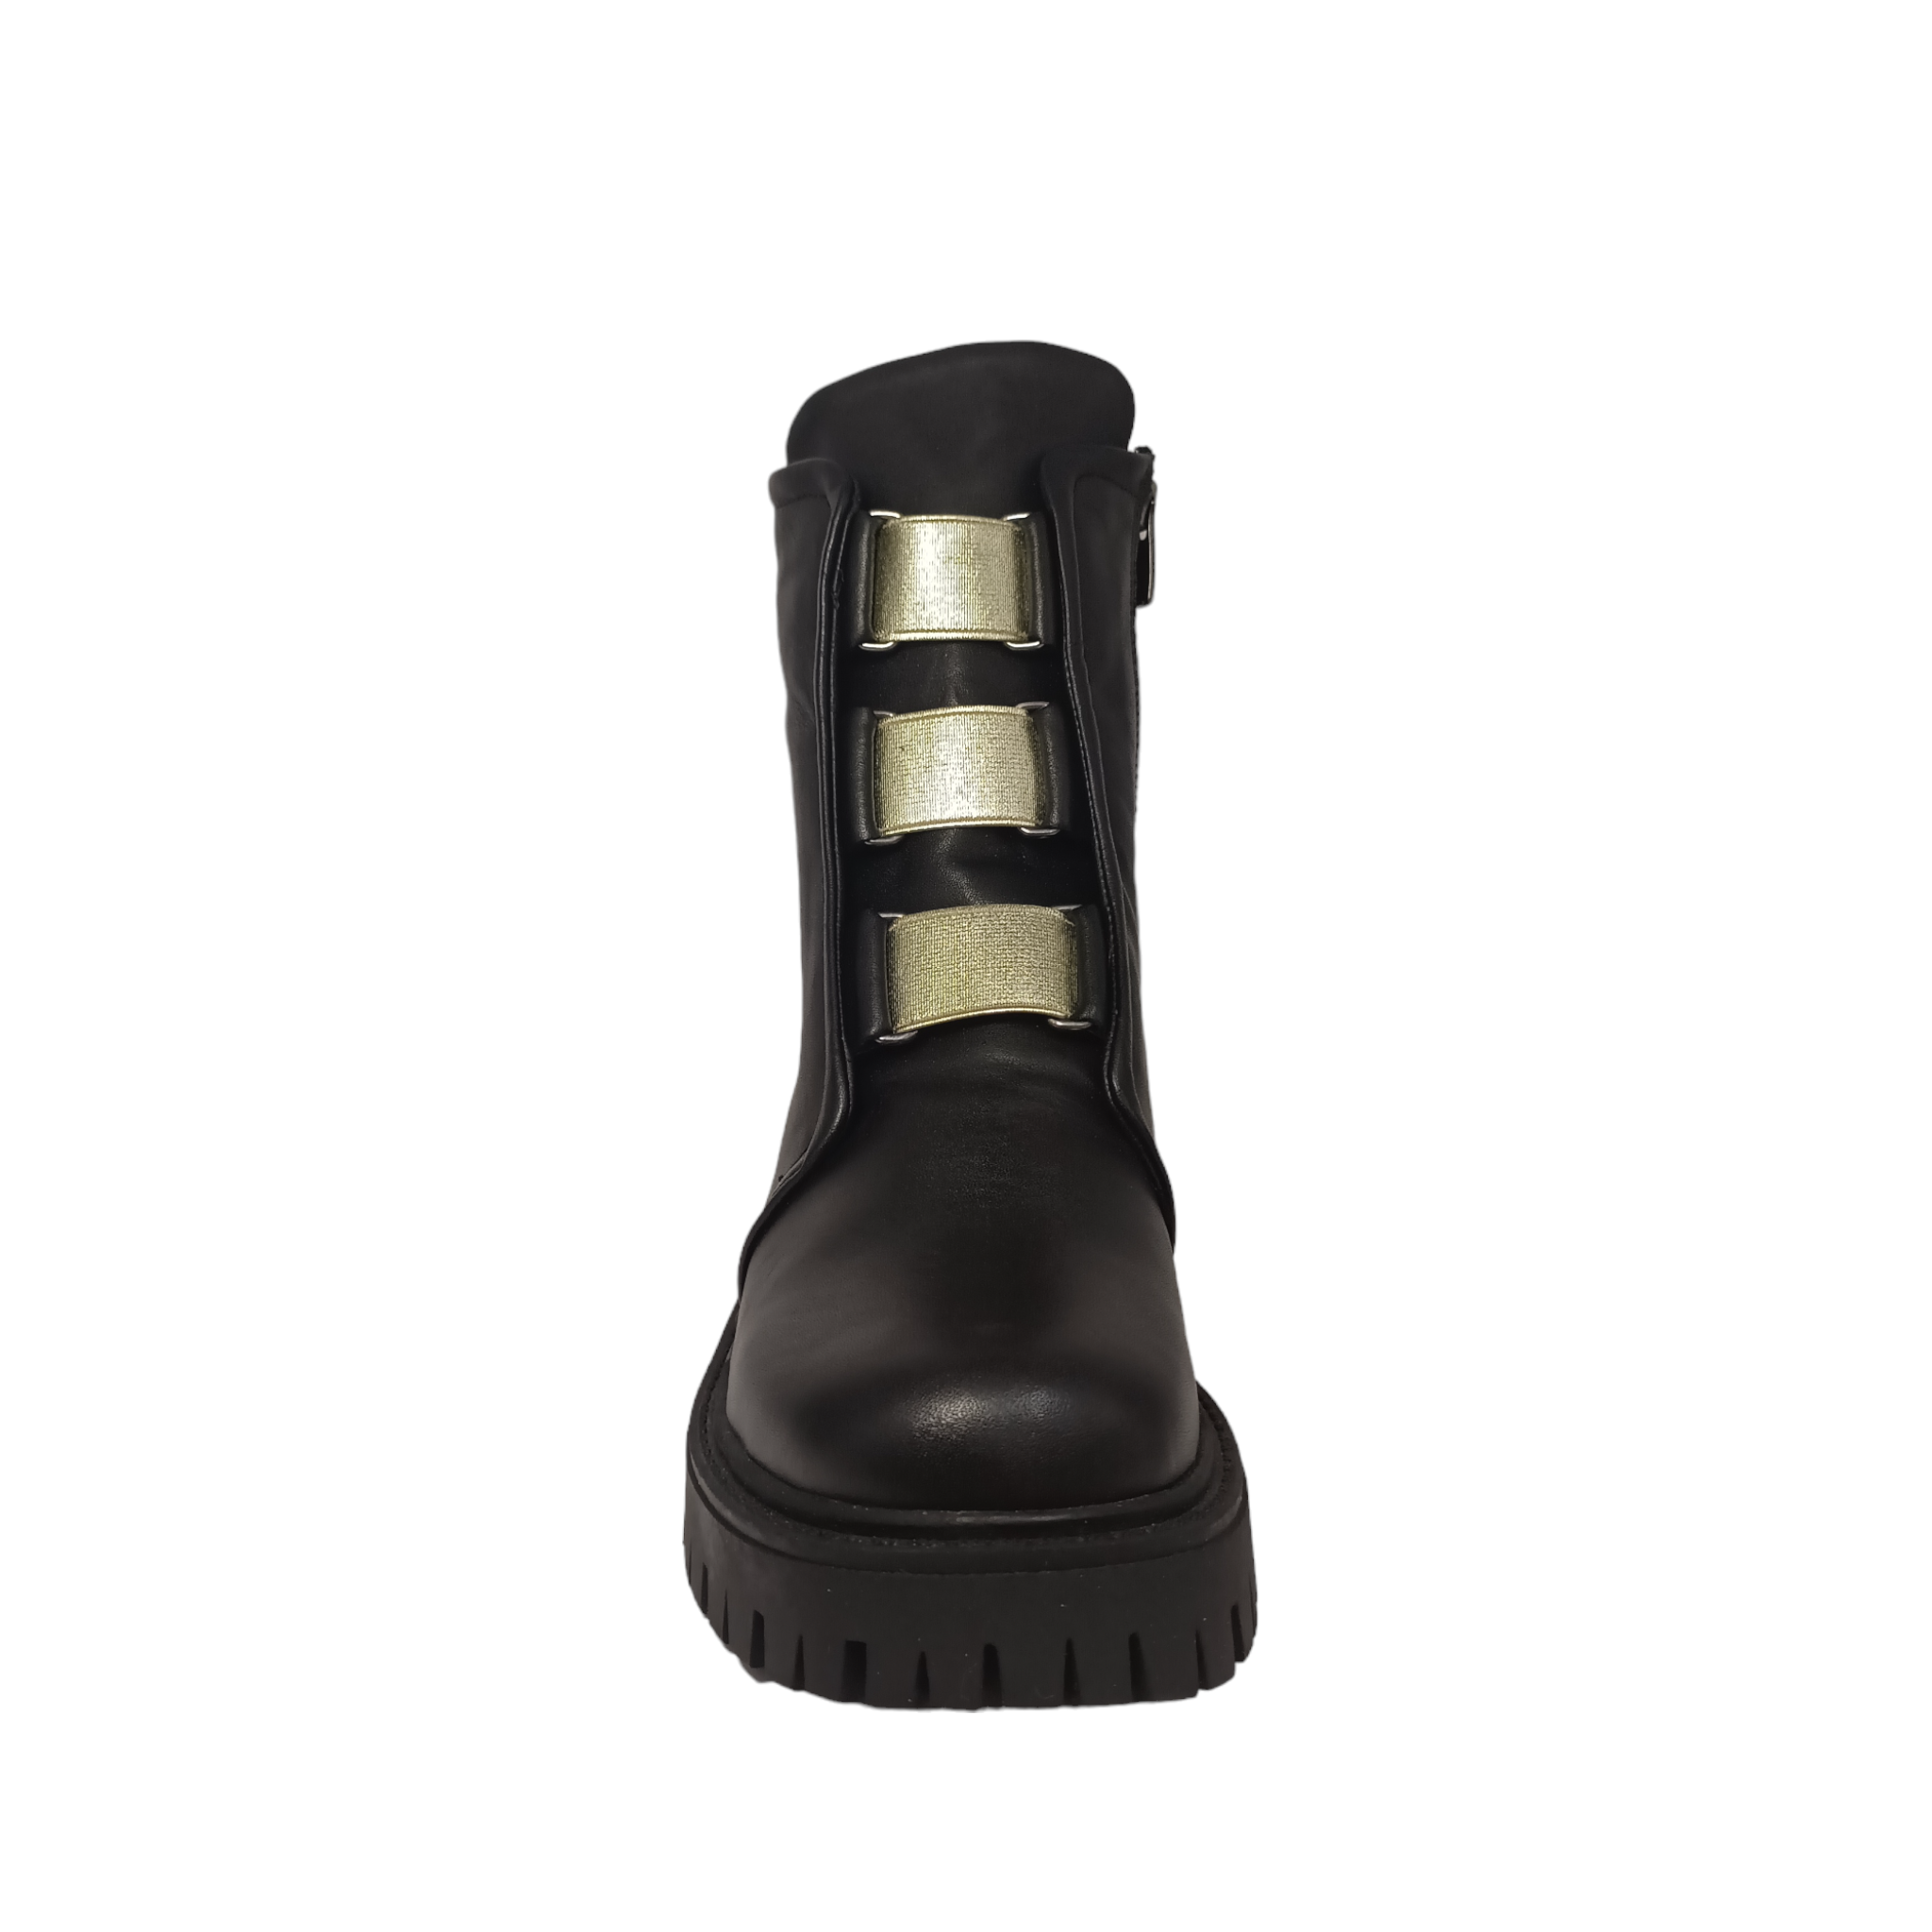 Tereta boot with metallic elastic on the front. Side angled view. Tall tongue on front of boot. Shop Online and In-store with shoe&amp;me